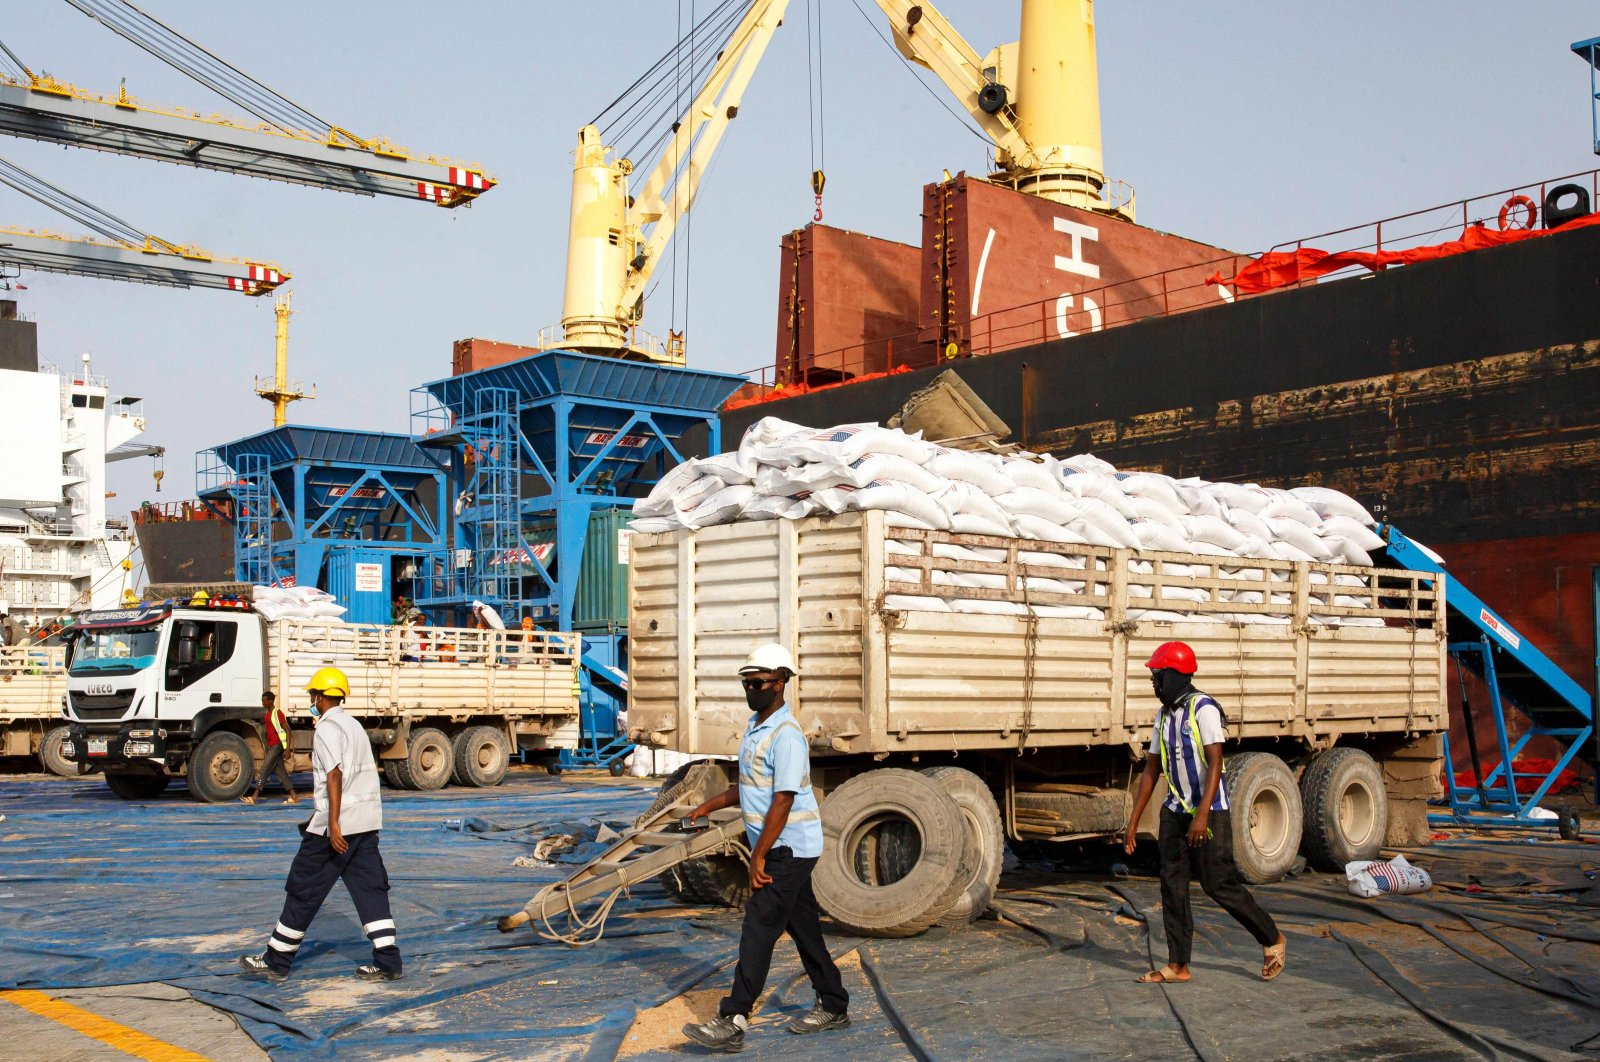 Grain from U.S. aid is unloaded from a ship and bagged at the Port of Berbera in Somaliland, Aug. 31, 2021. (AFP Photo)